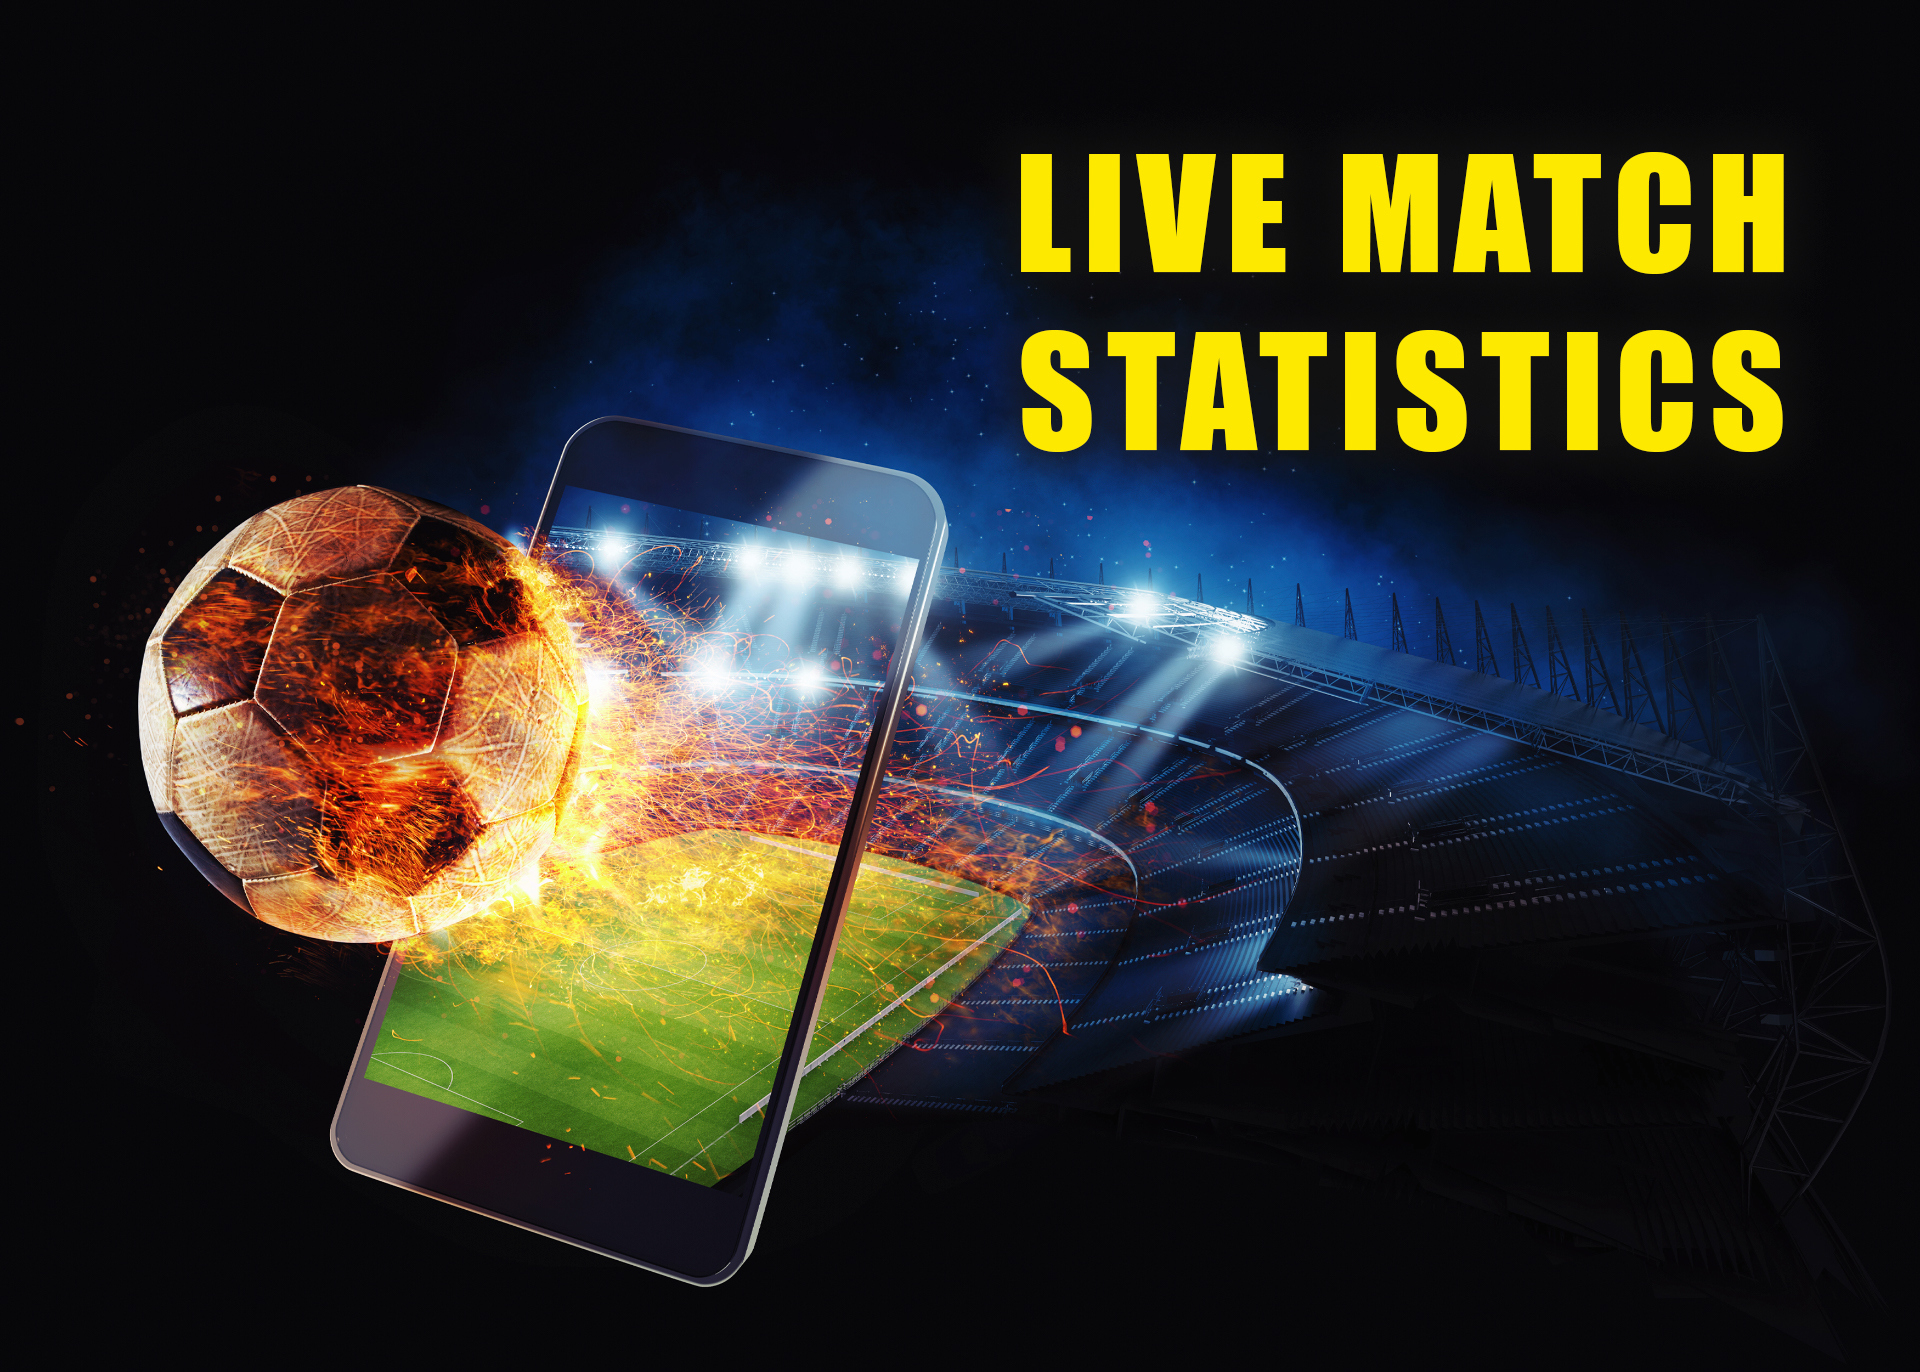 If your match has already started, you can easily follow the actual statistics in the app.